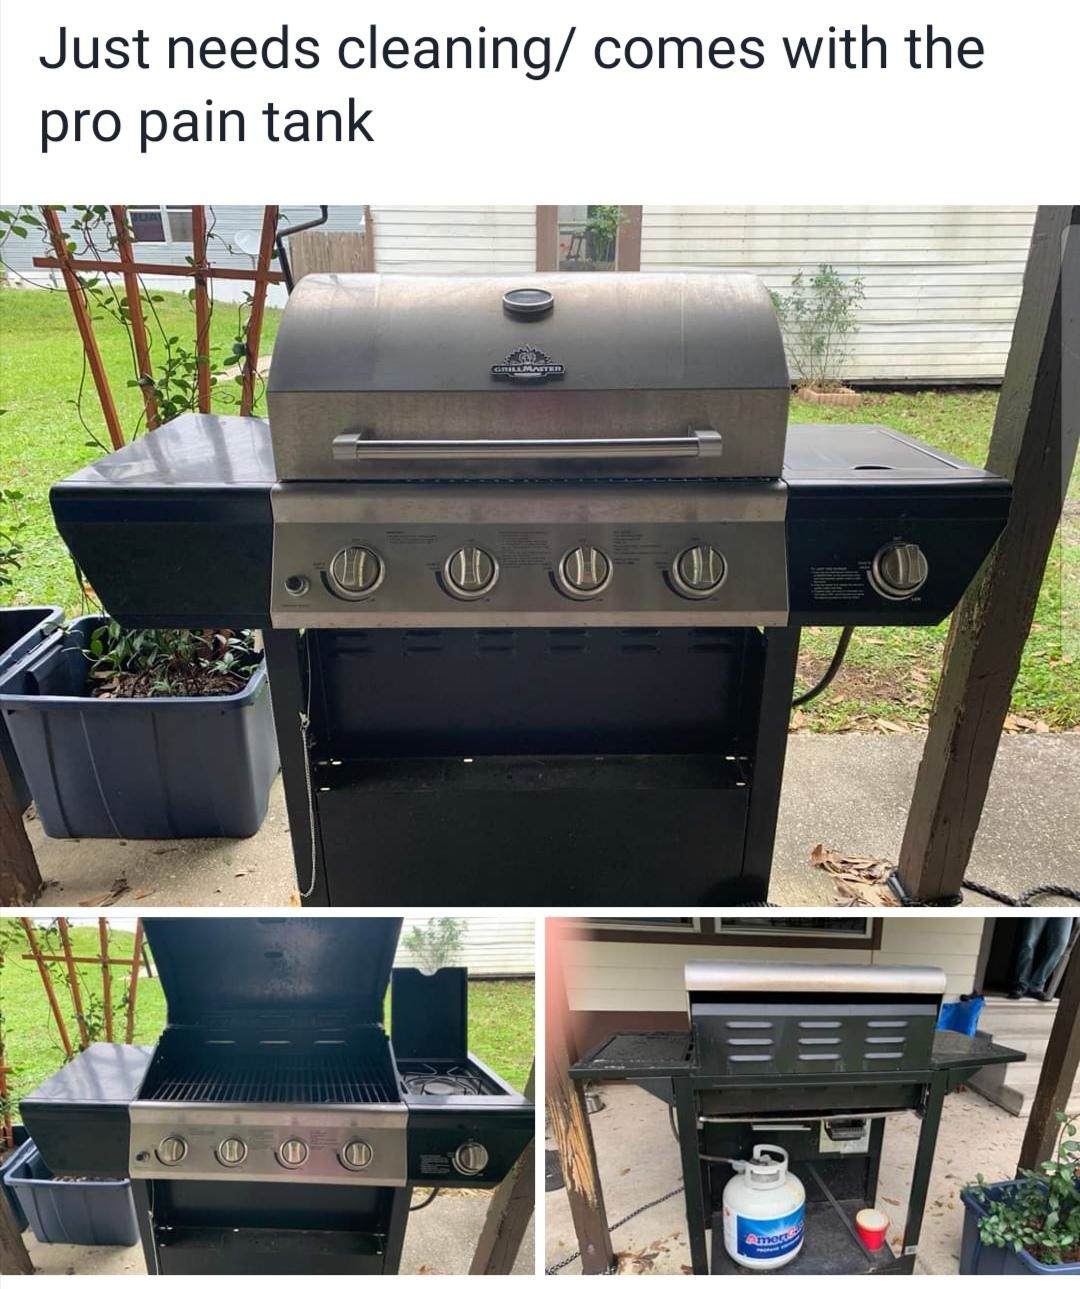 Stainless steel gas grill on a deck with cleaning products; caption mentions it needs cleaning and comes with a &quot;pro pain tank&quot;